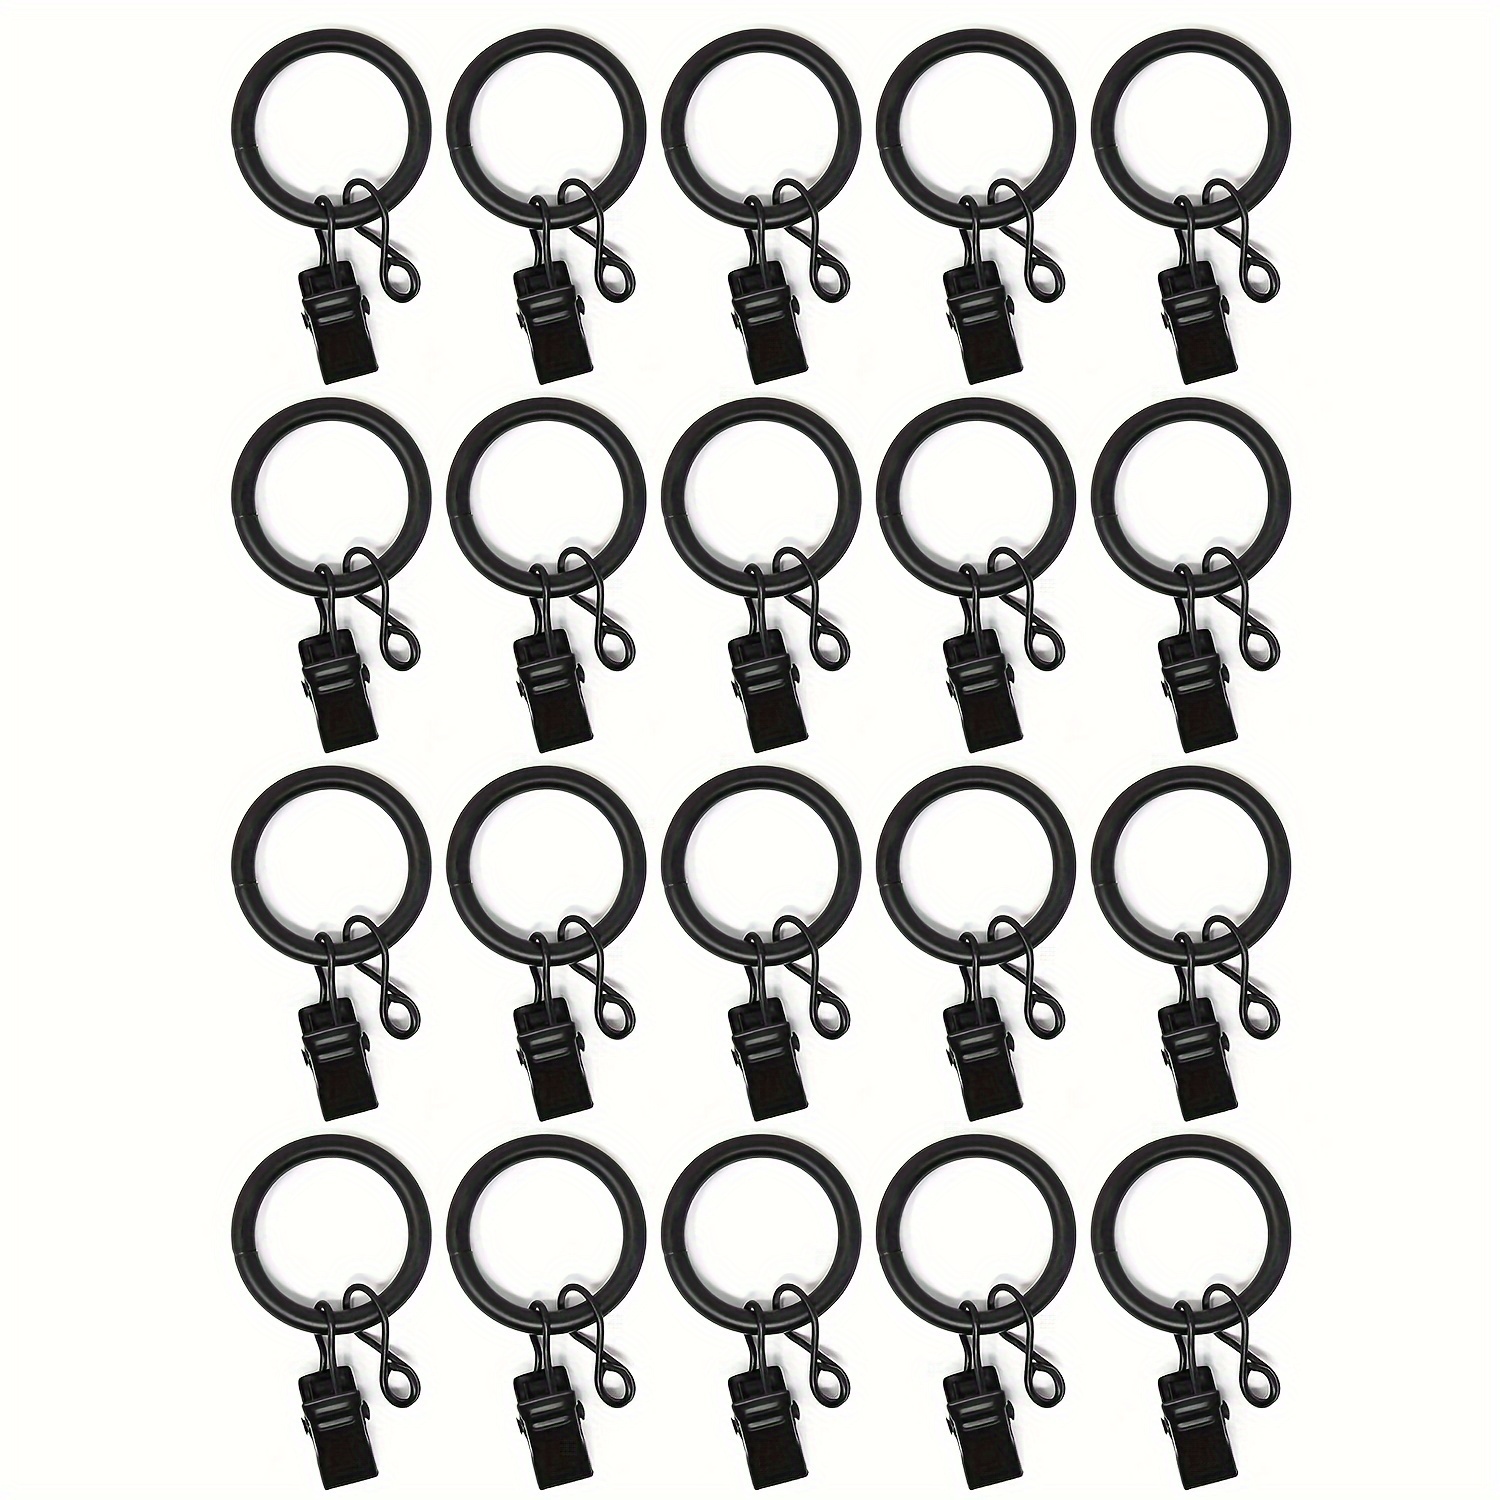 

20pcs Solid Metal Window Drapery Curtain Panel Ring With Eyelet, 1" Inner Diameter, Fits Up To 3/4" Rod Multicolor